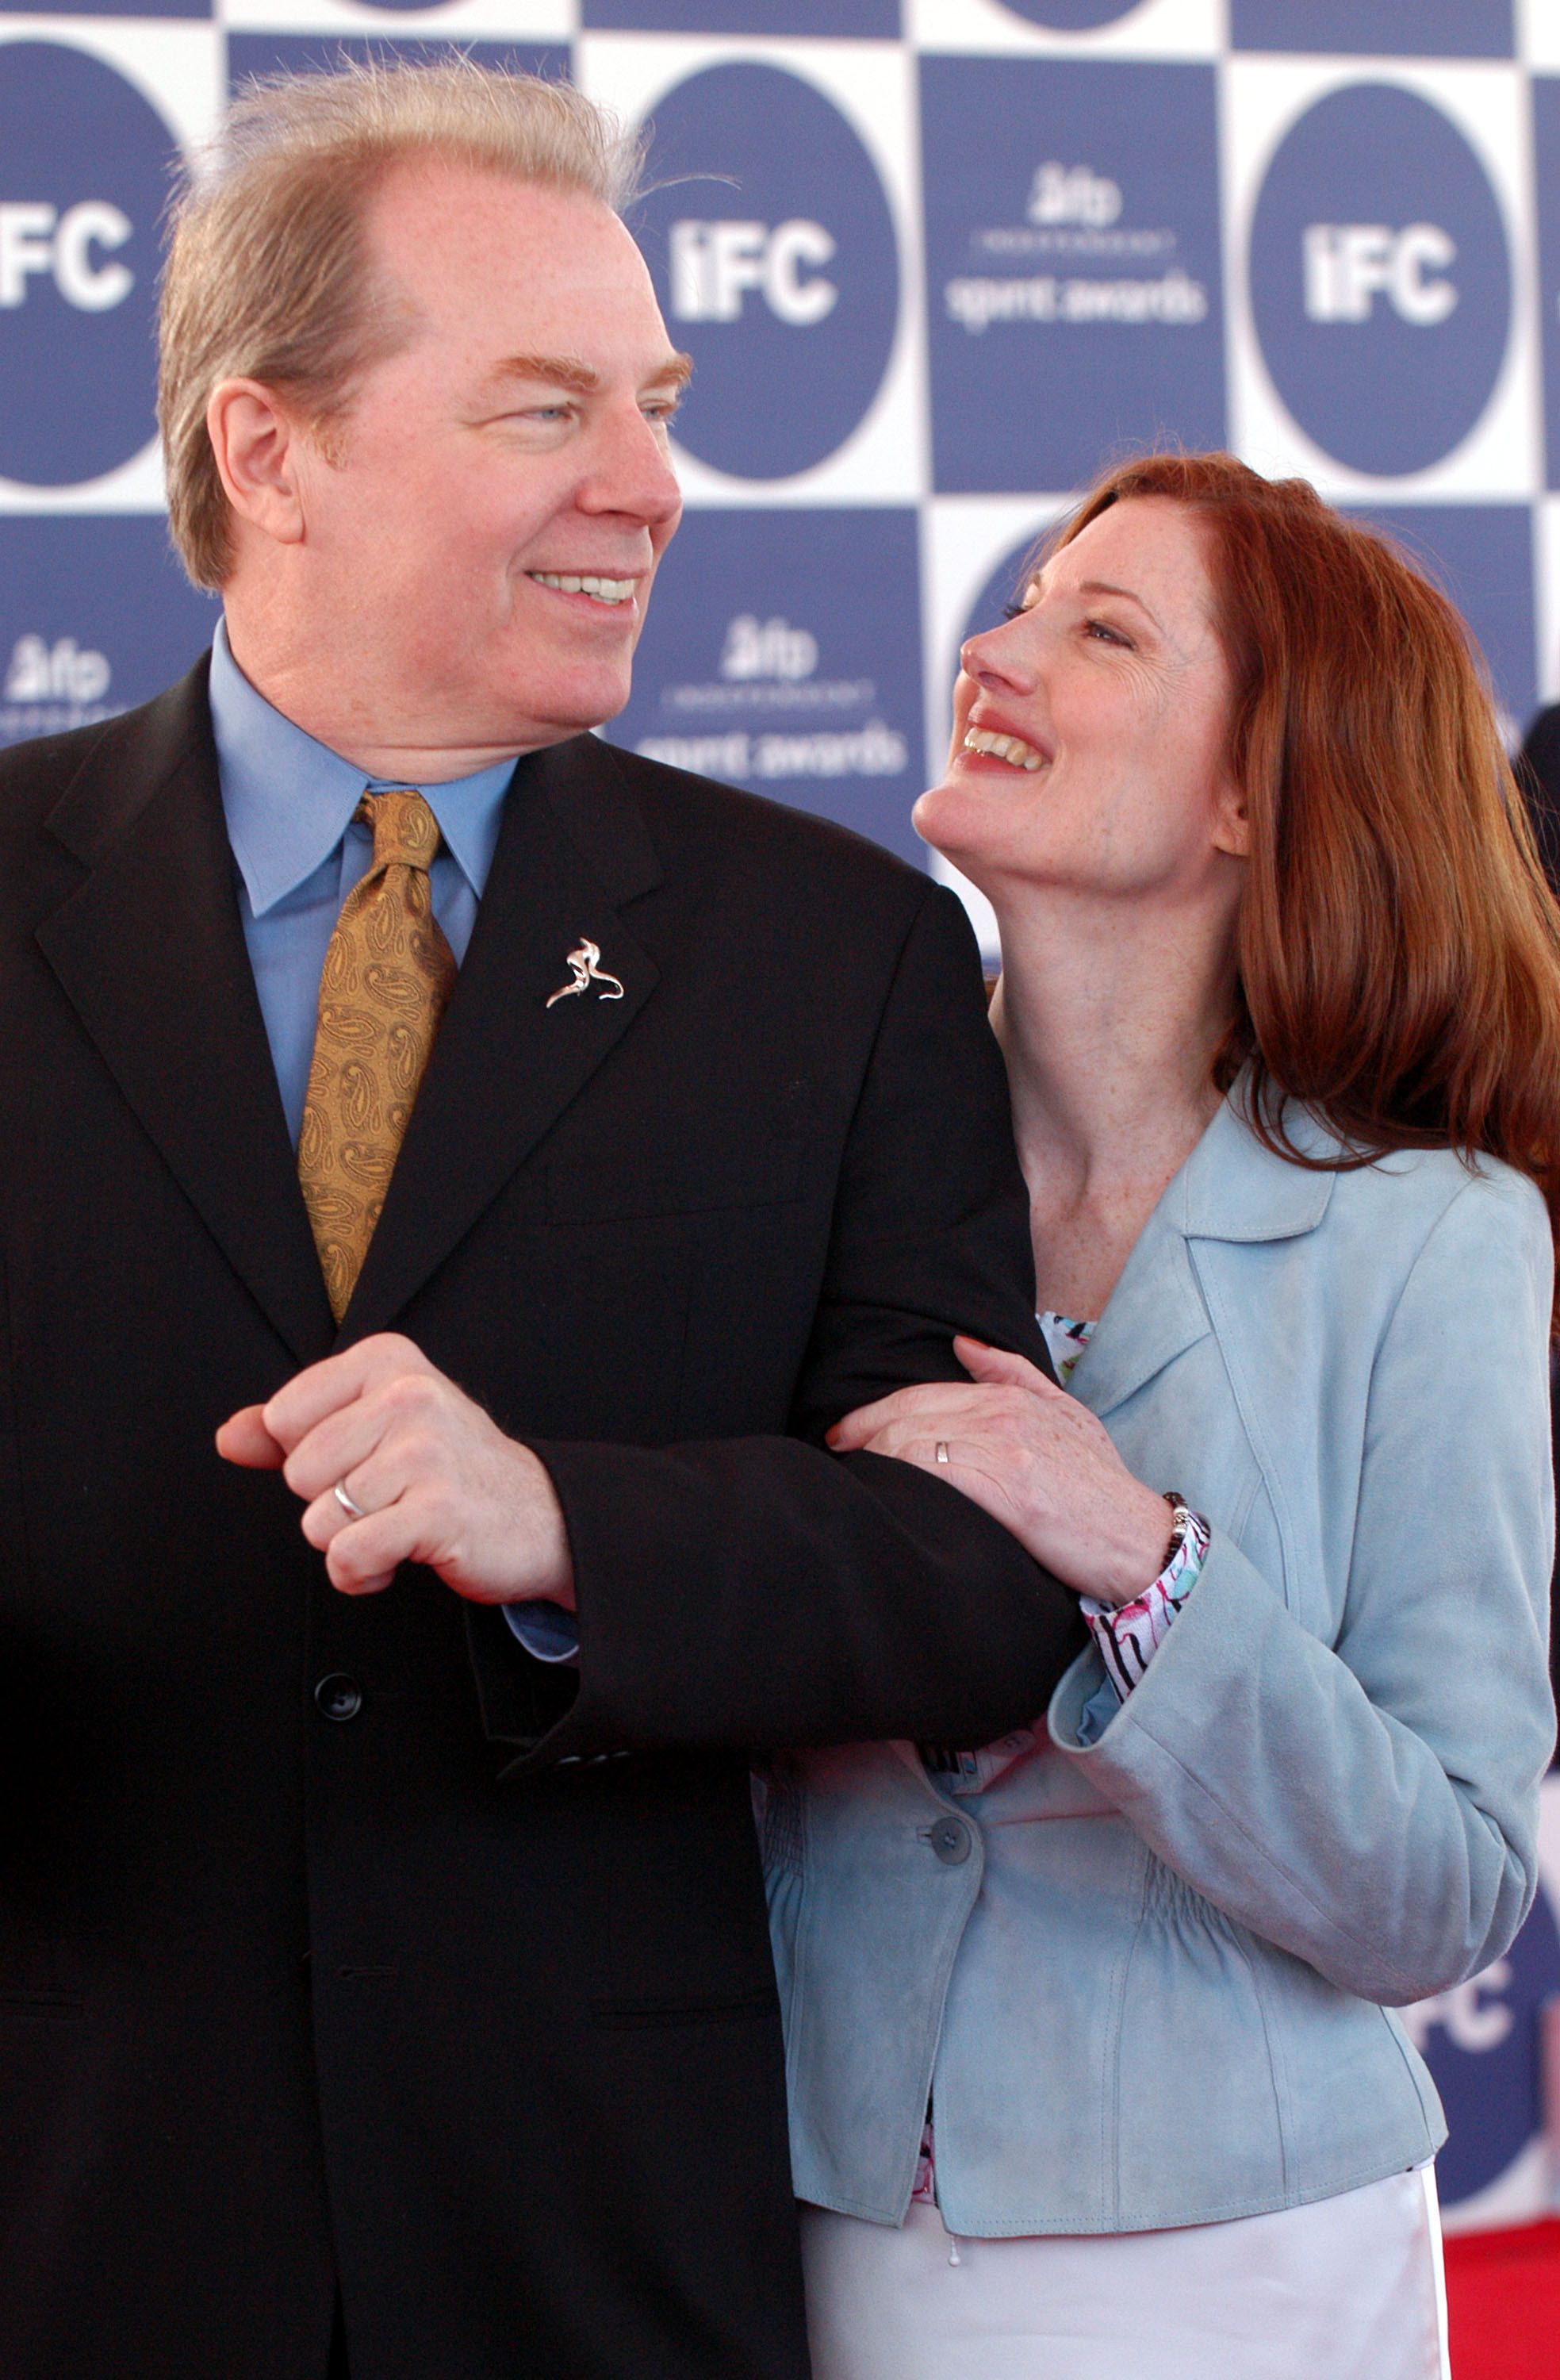 Michael McKean and Annette O'Toole during the Independent Spirit Awards at Santa Monica Pier in California, on February 28, 2004 | Photo: Jeff Kravitz/FilmMagic/Getty Images